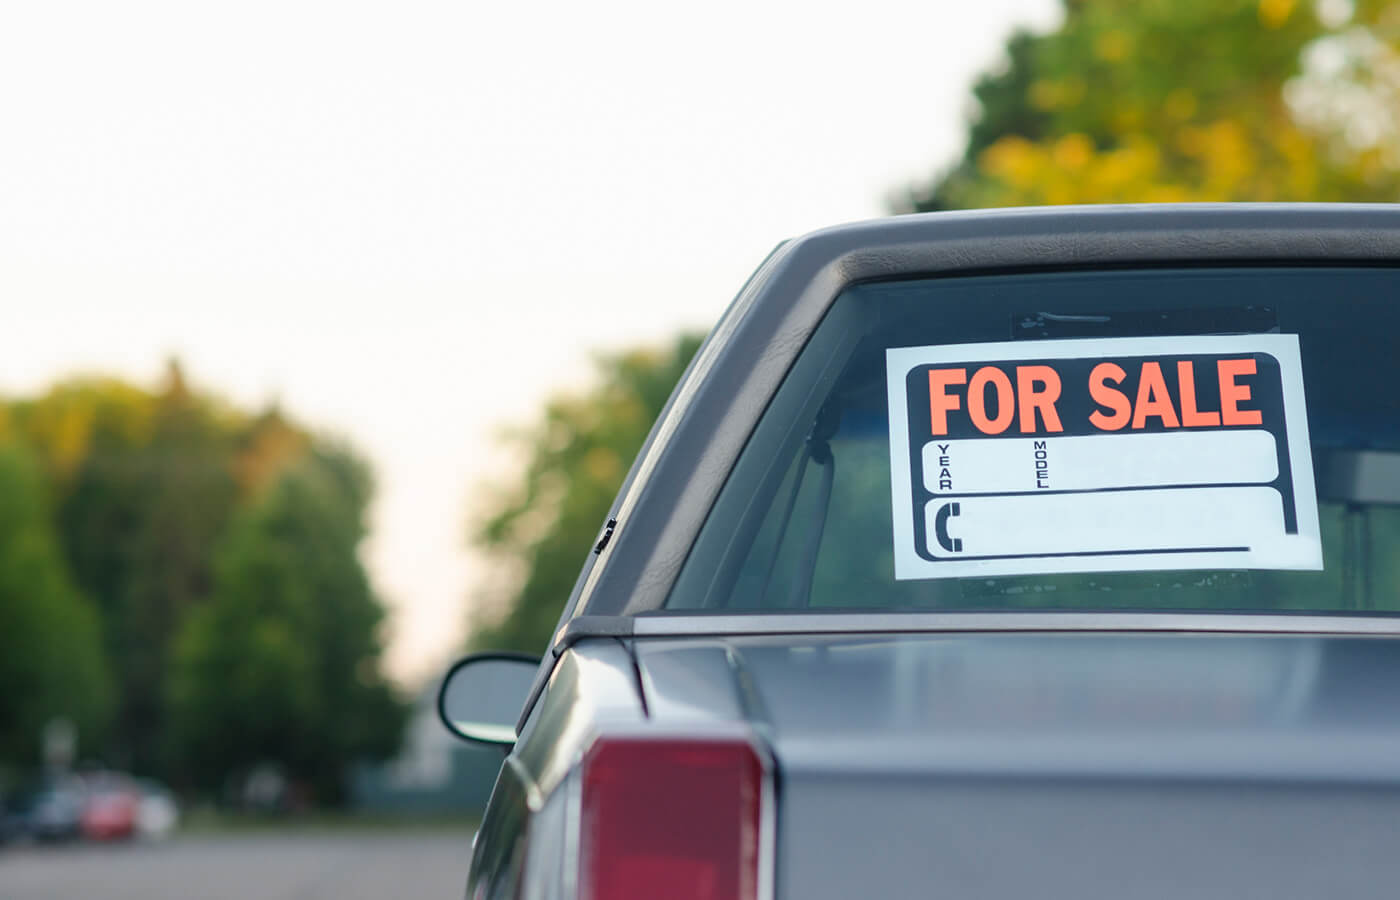 What Is a Salvage Title Car and Should I Buy One? - Experian